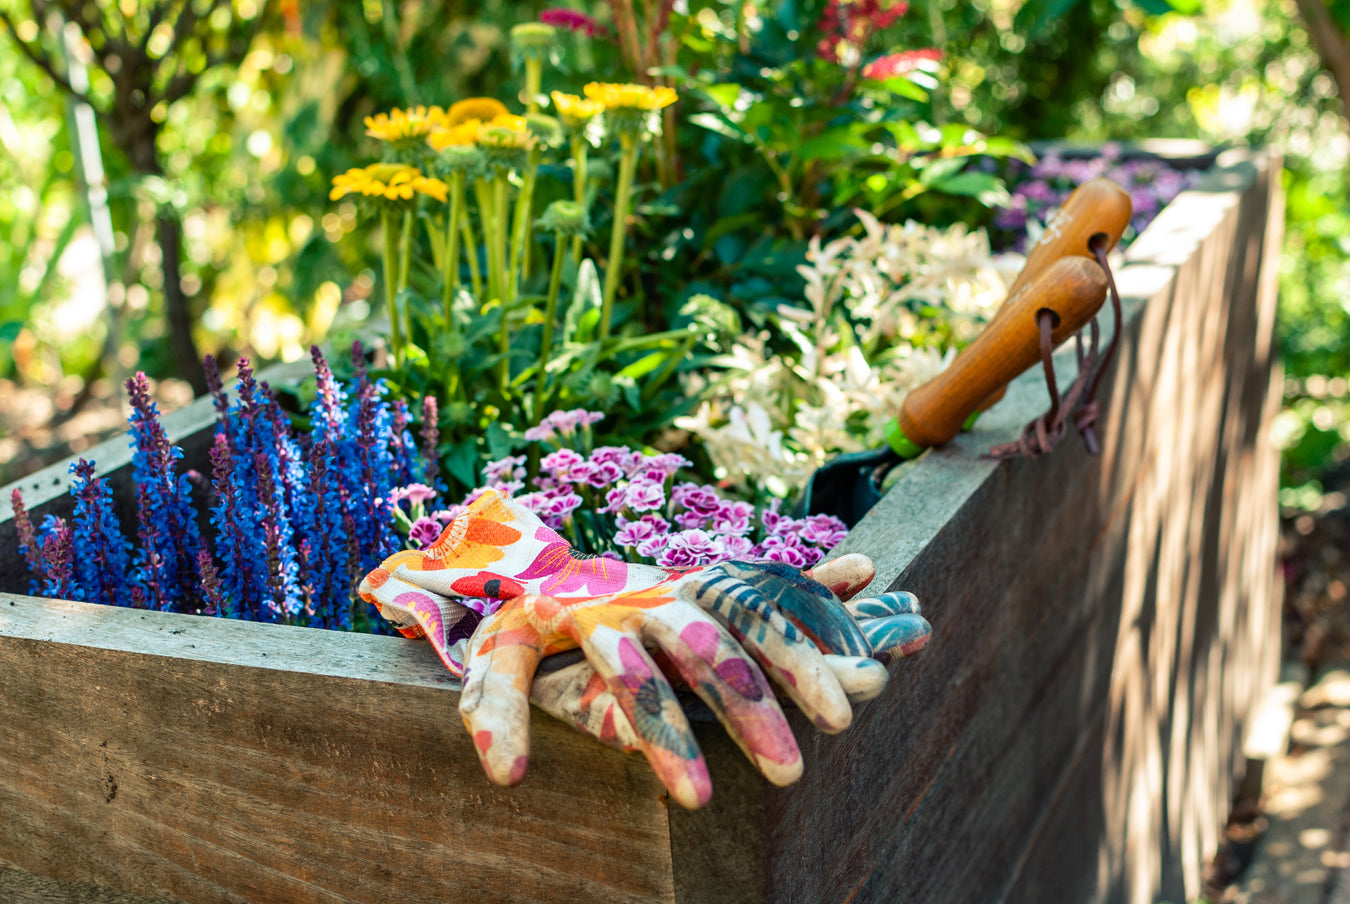 Wooden Veg, Herb and Flower Planters